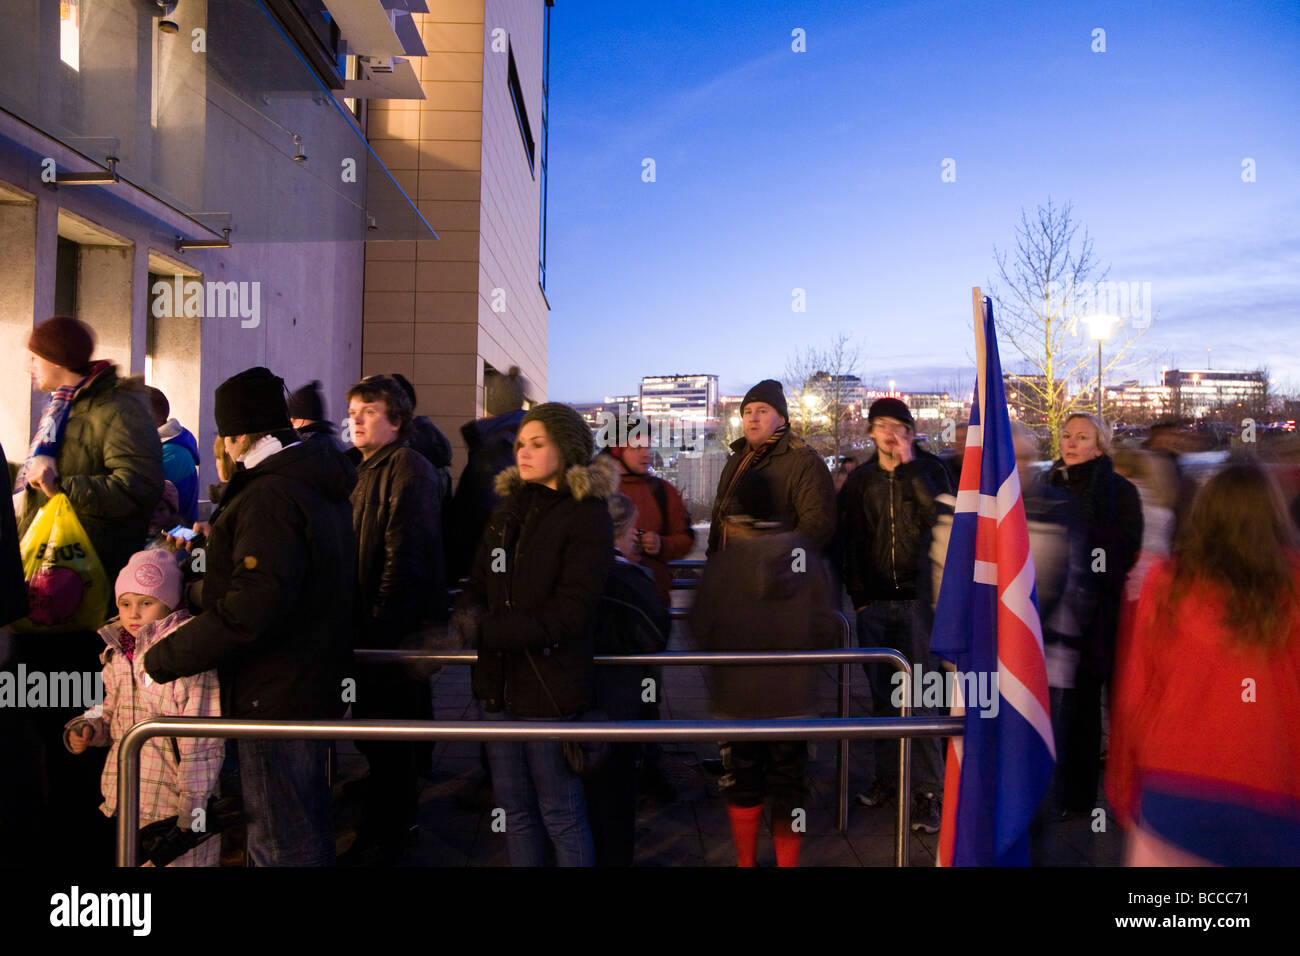 People waiting to buy tickets to a soccer match, Laugardalsvollur stadium, Laugardalur Reykjavik Iceland Stock Photo